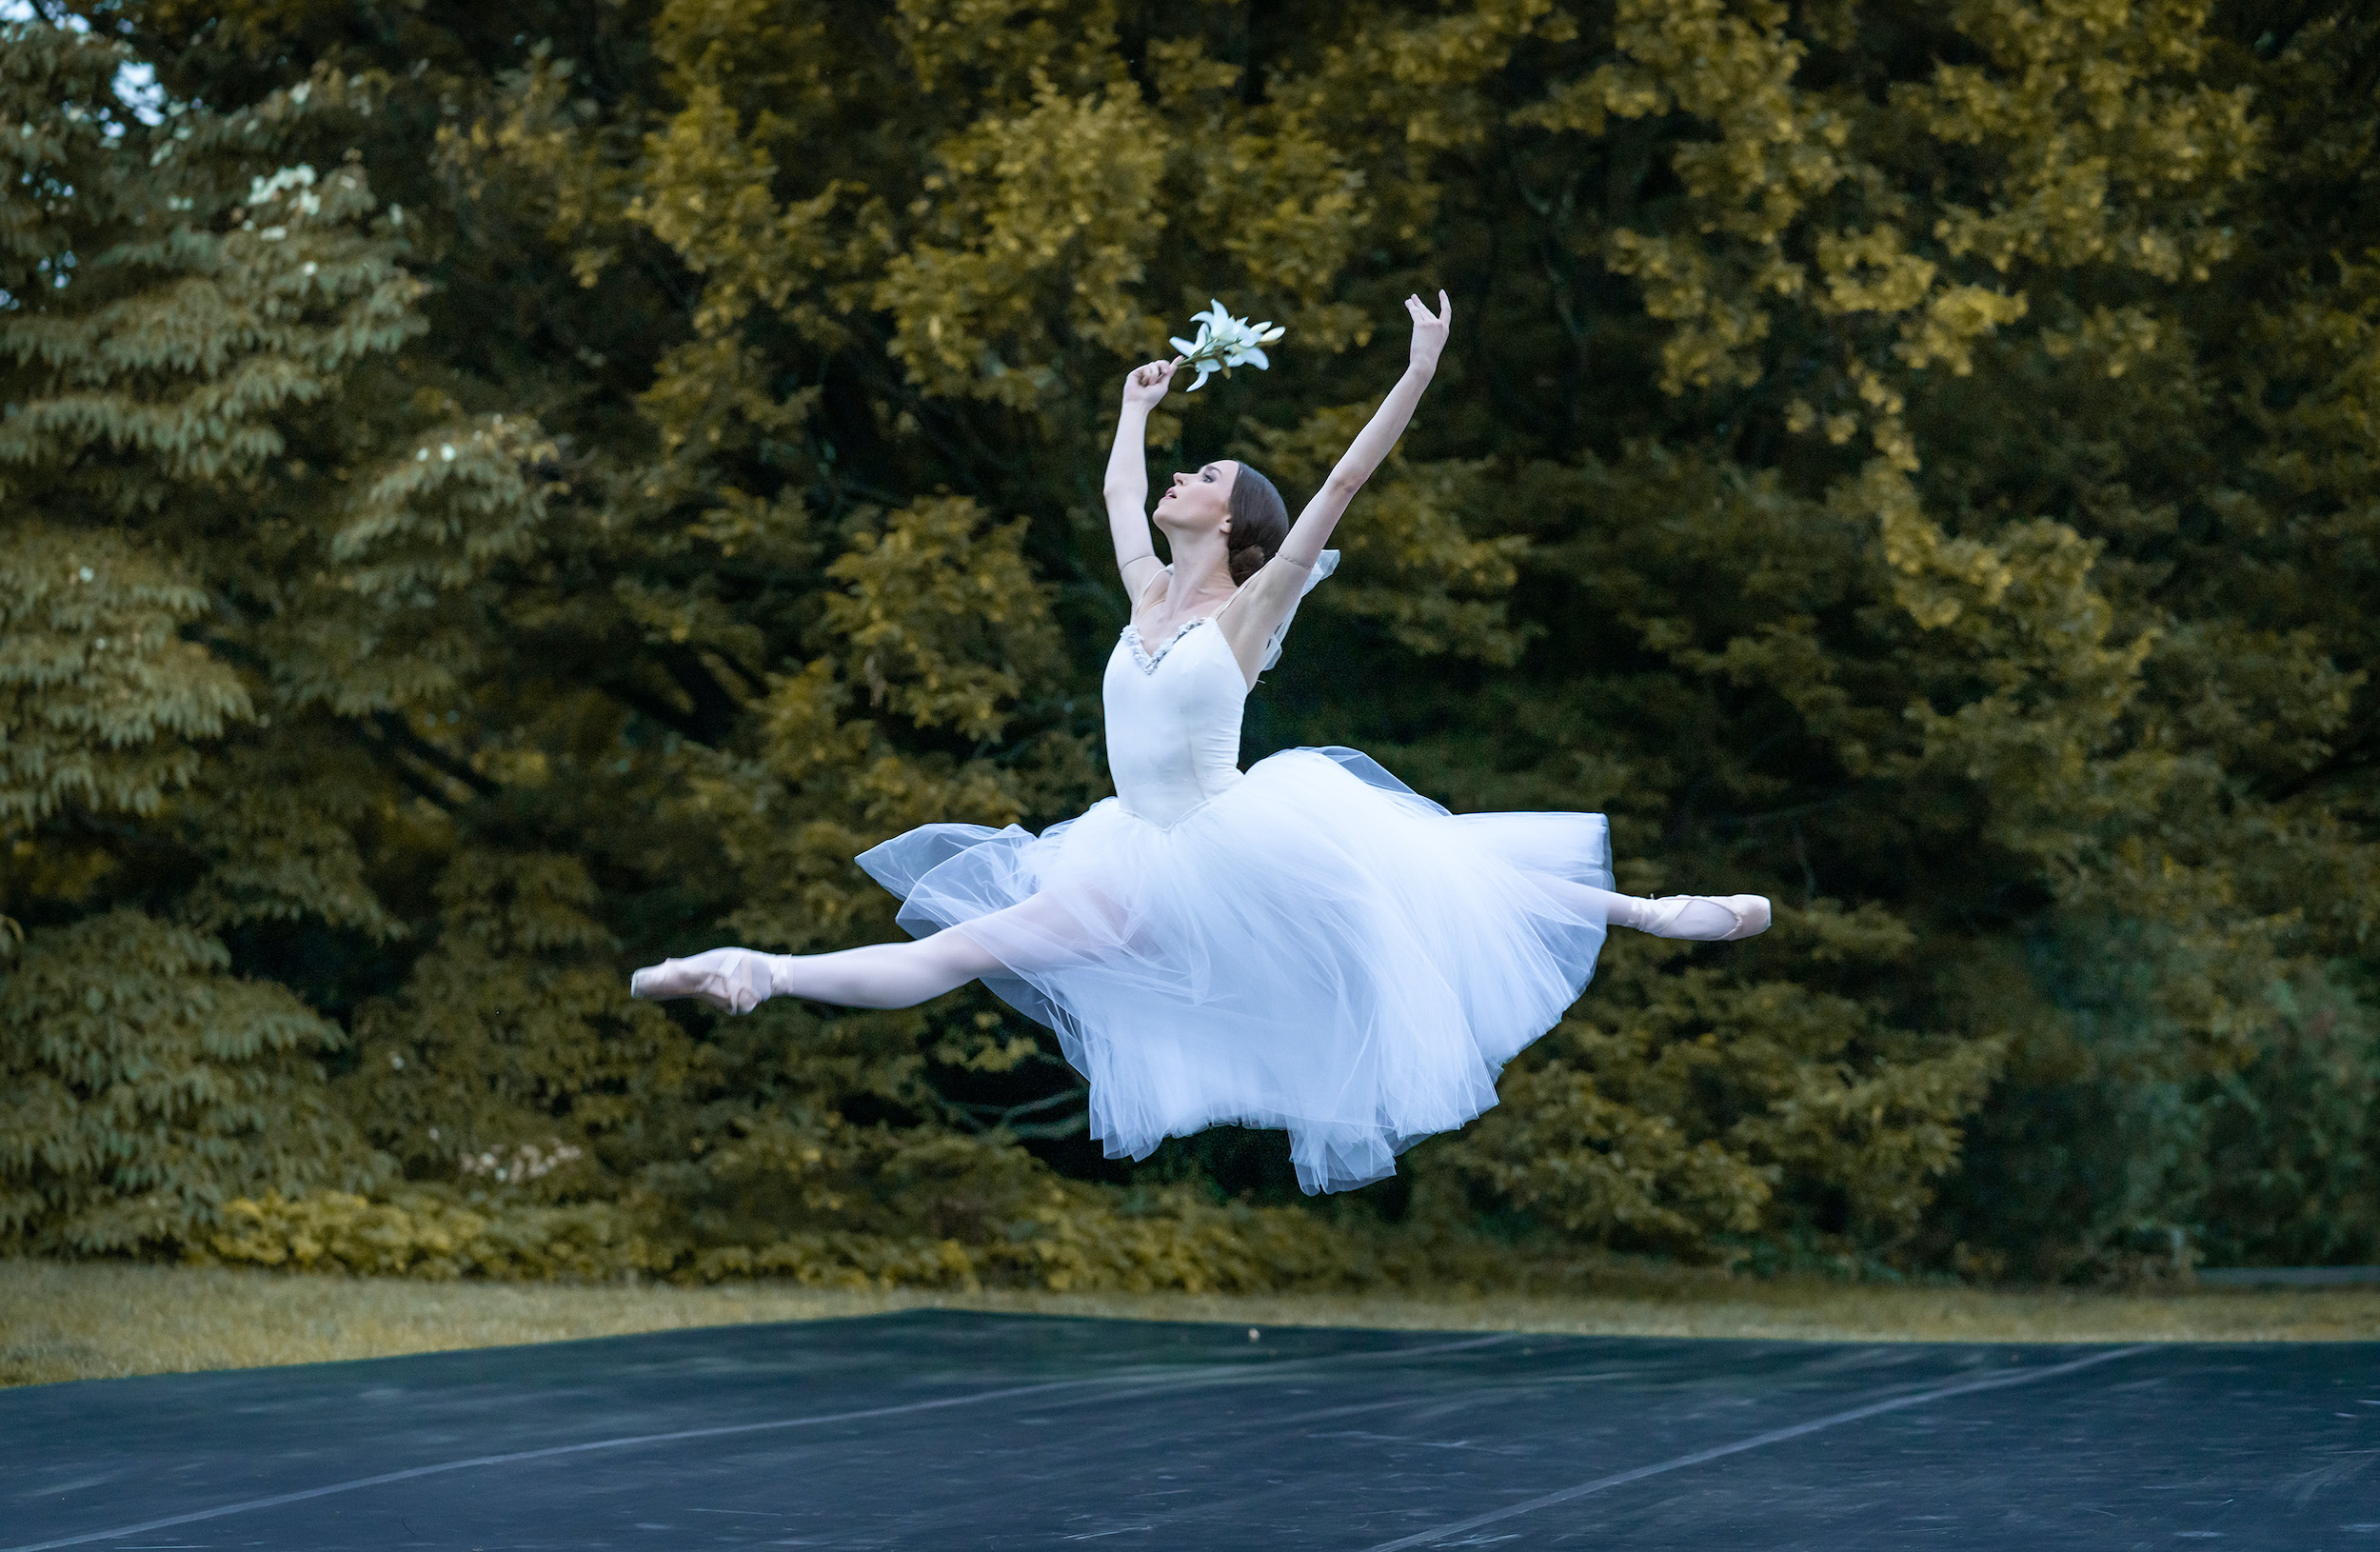 During an outdoor performance at dusk, Skylar Brandt does a giant saut de chat with her arms opening out of high fifth position. She holds a white lily in her upstage hand and looks toward the sky forlornly. She wears a long, white Romantic-style tutu, pink tights and pointe shoes. She dances on a dark marley stage floor, and in front of green evergreen trees.